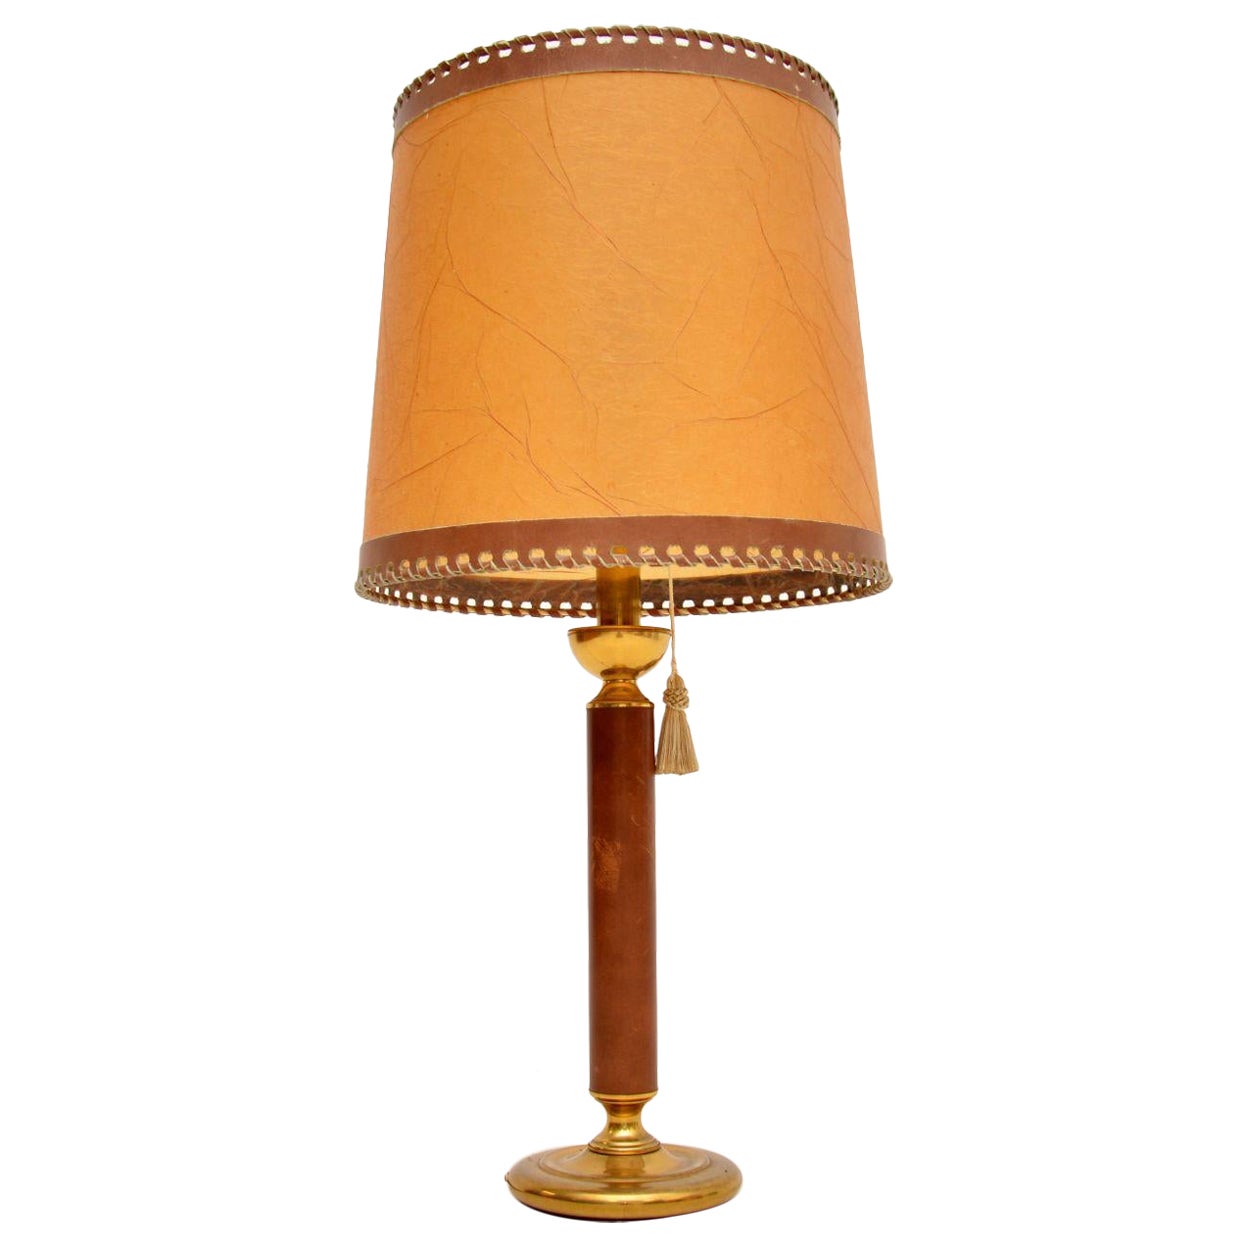 1970s Vintage Leather & Brass Table Lamp